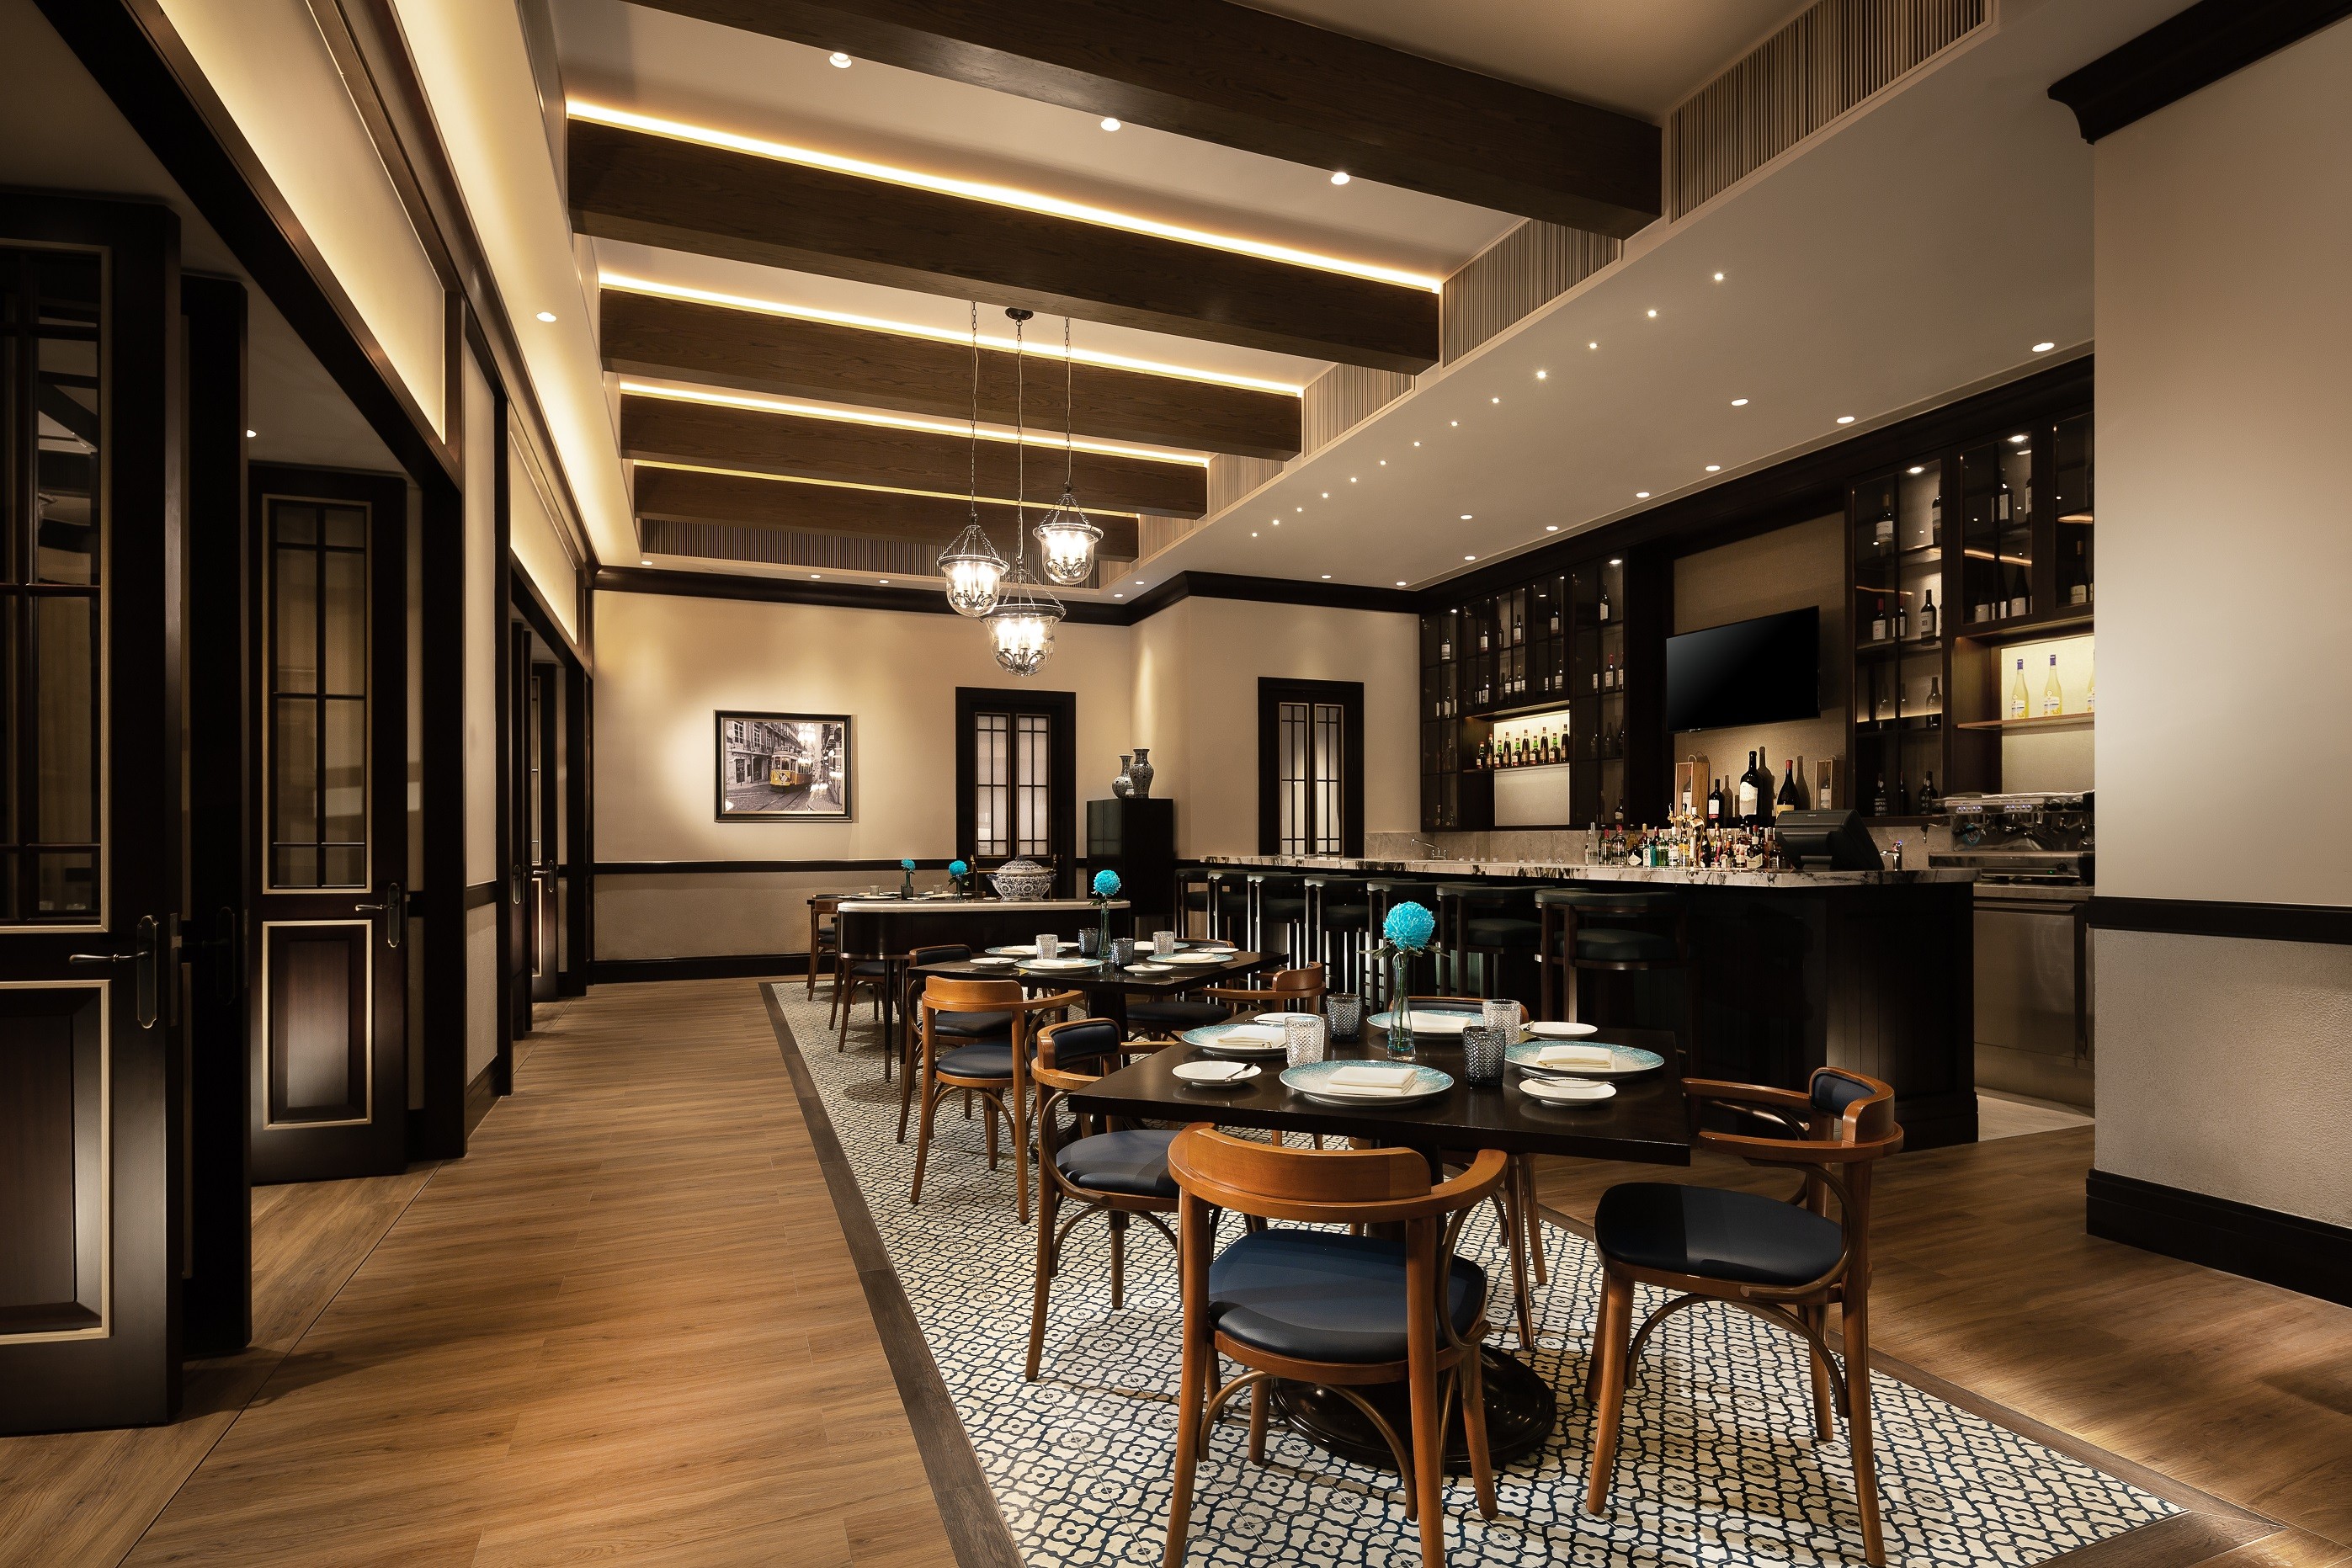 Located in the in Sands Cotai Central shopping complex, Chiado strikes a balance between innovation and authenticity. Photos: handouts